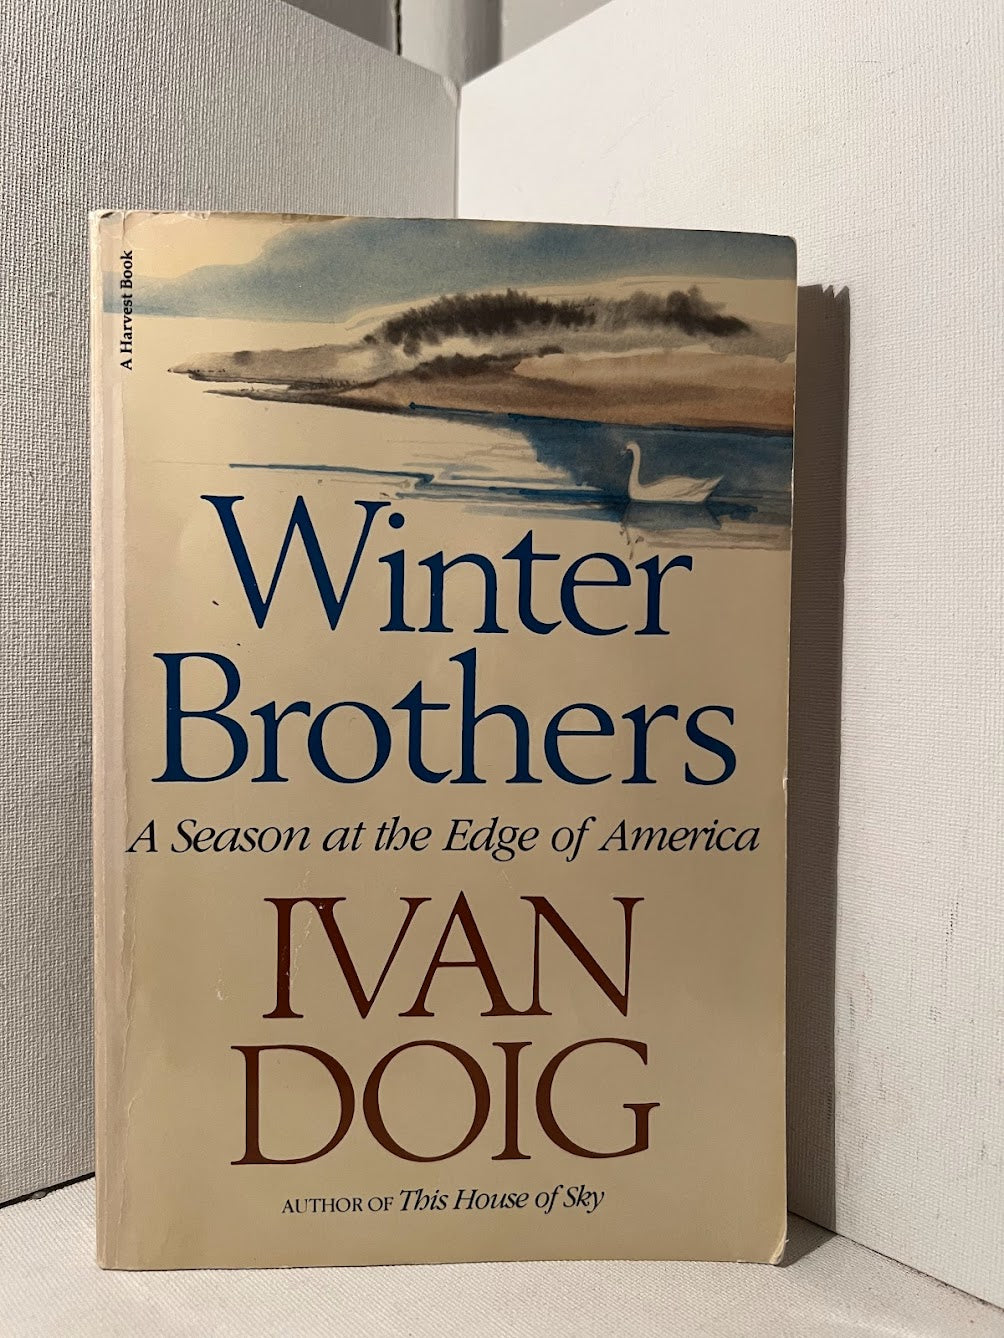 Winter Brothers by Ivan Doig